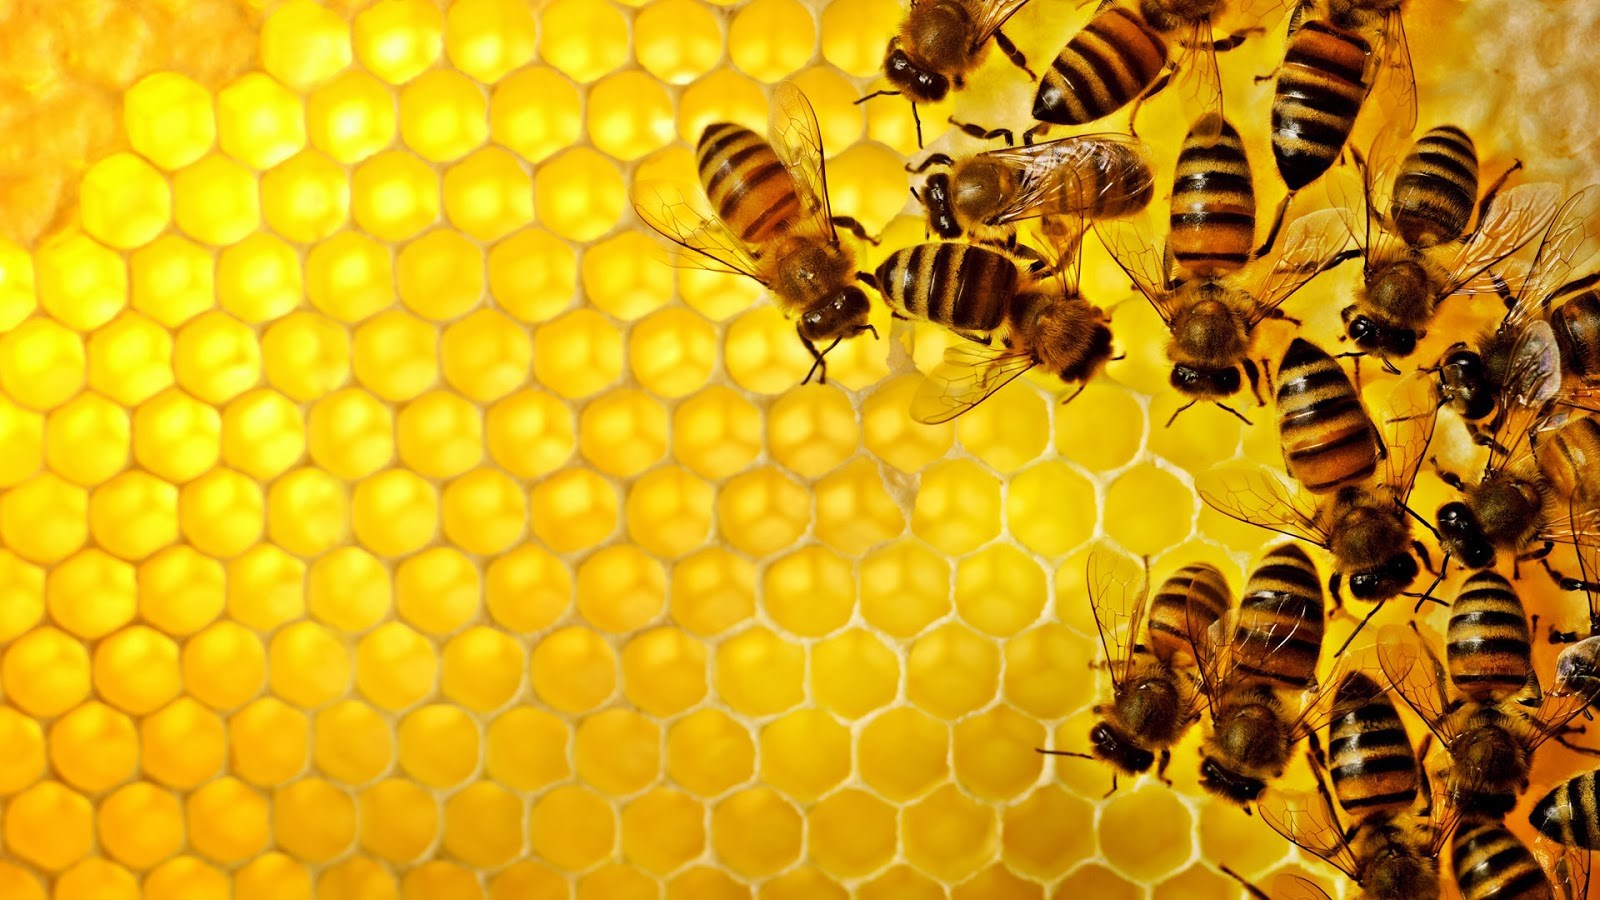 Honey bees in a honeycomb